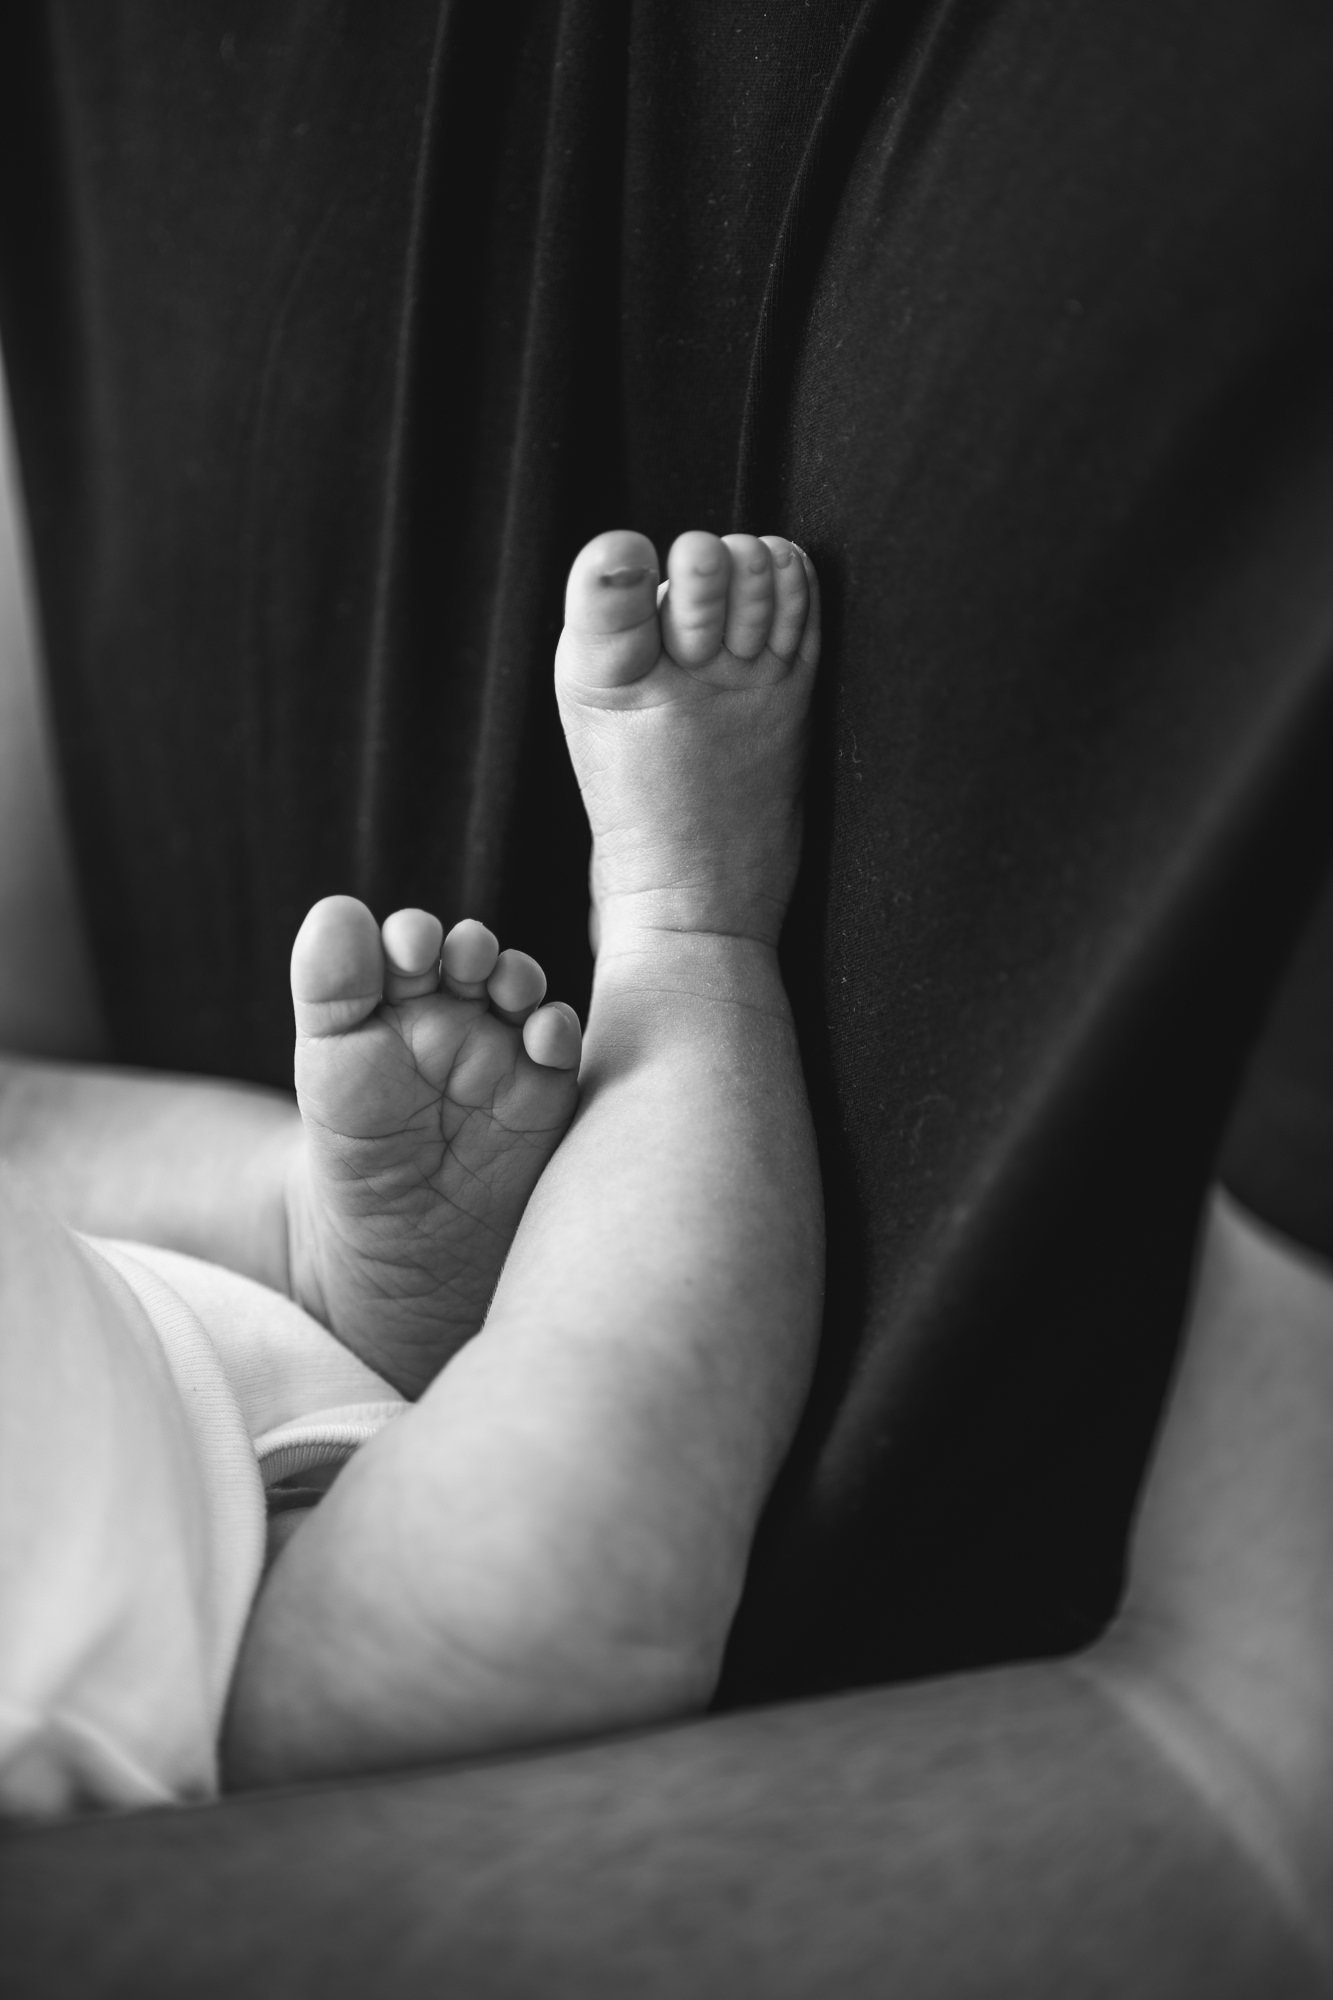  The cutest baby feet and toes close up in timeless black and white. Baby rests legs on father’s chest. Tender moment between baby and dad captured by Nicole Hawkins Photography in New Jersey. #newbornportraits #newbornstudioshoots #NewJerseyPhotogra